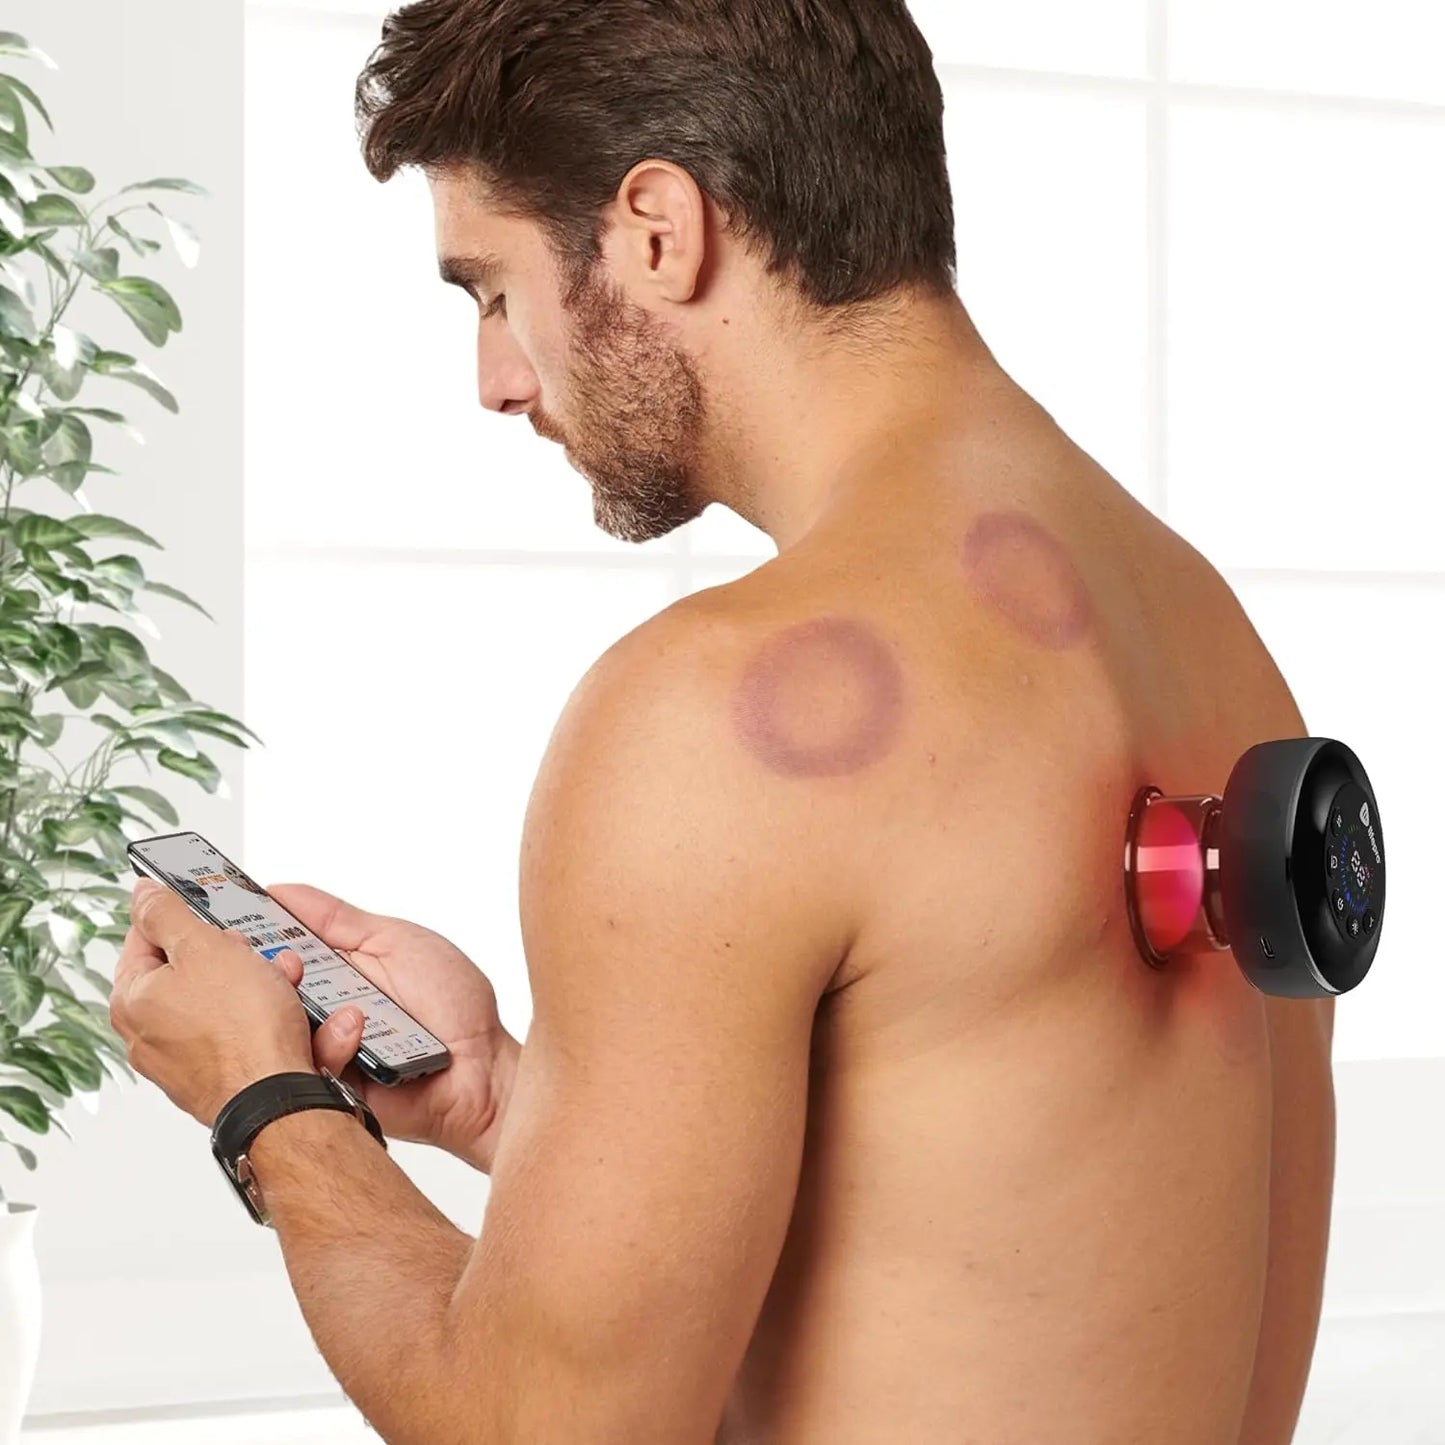 Relievacup Pro Smart Cupping Device with Red Light Therapy